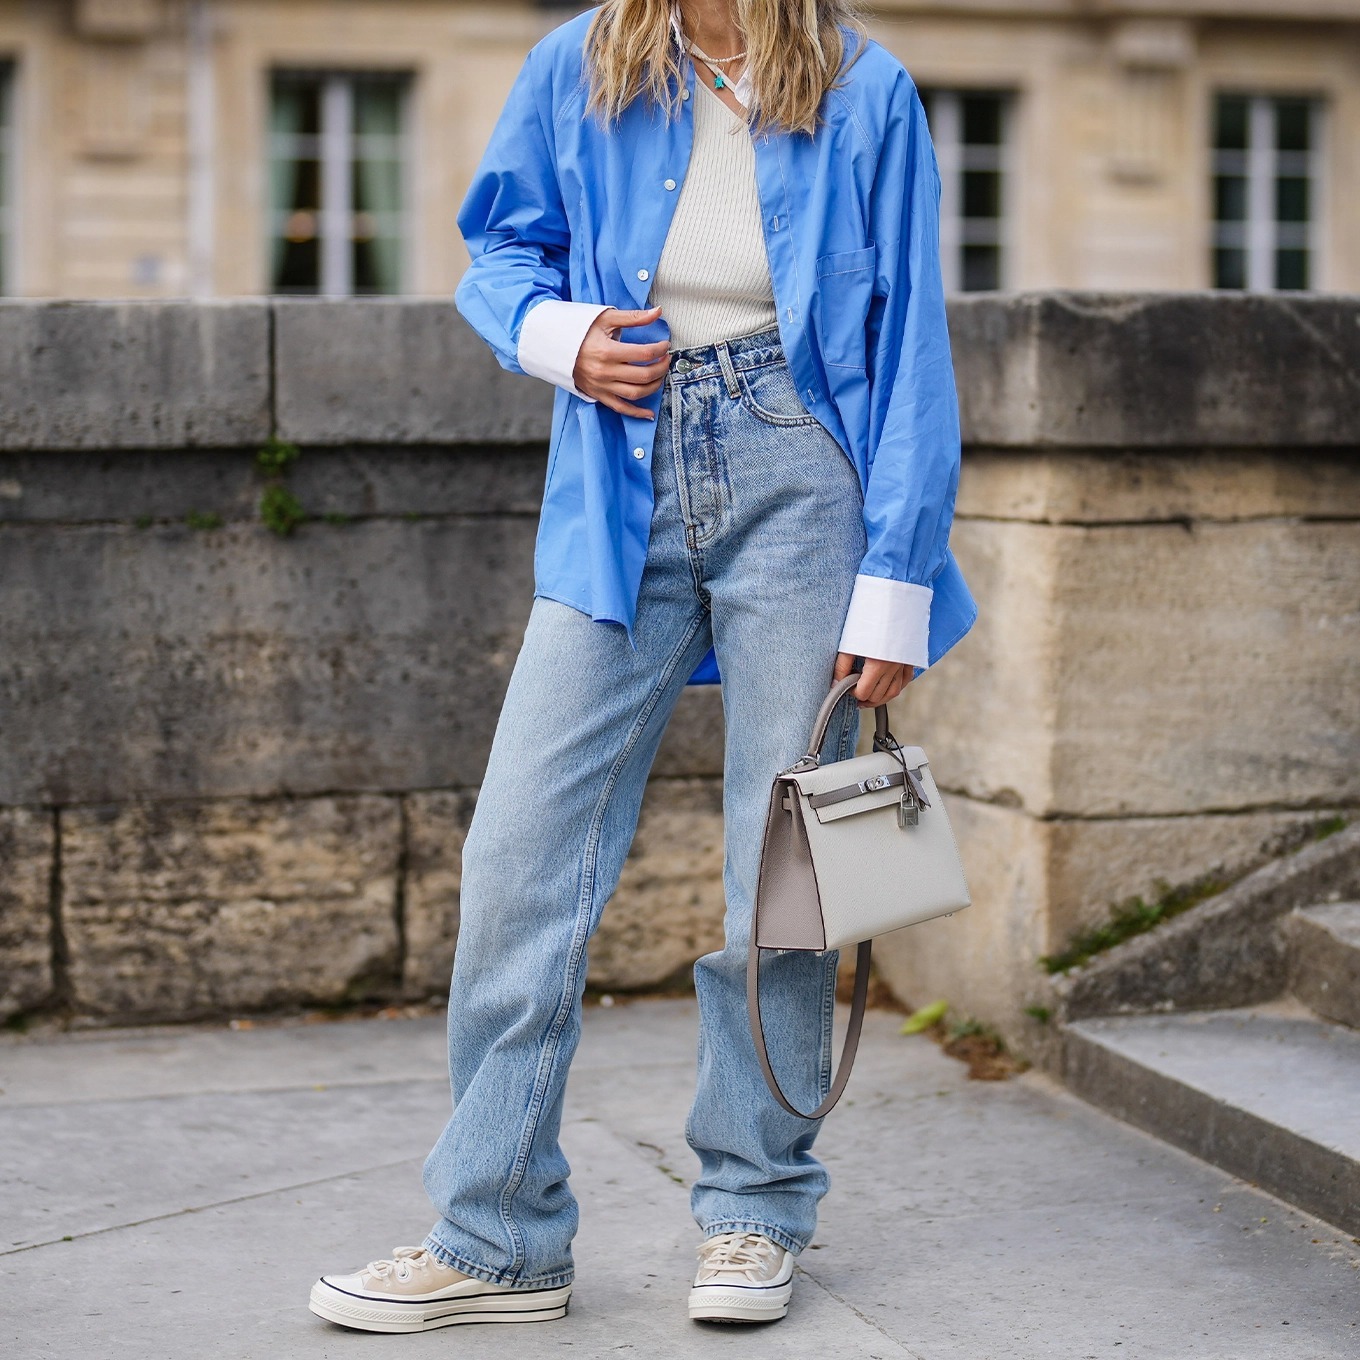 16 Dresses to Wear with Sneakers in 2023 - PureWow